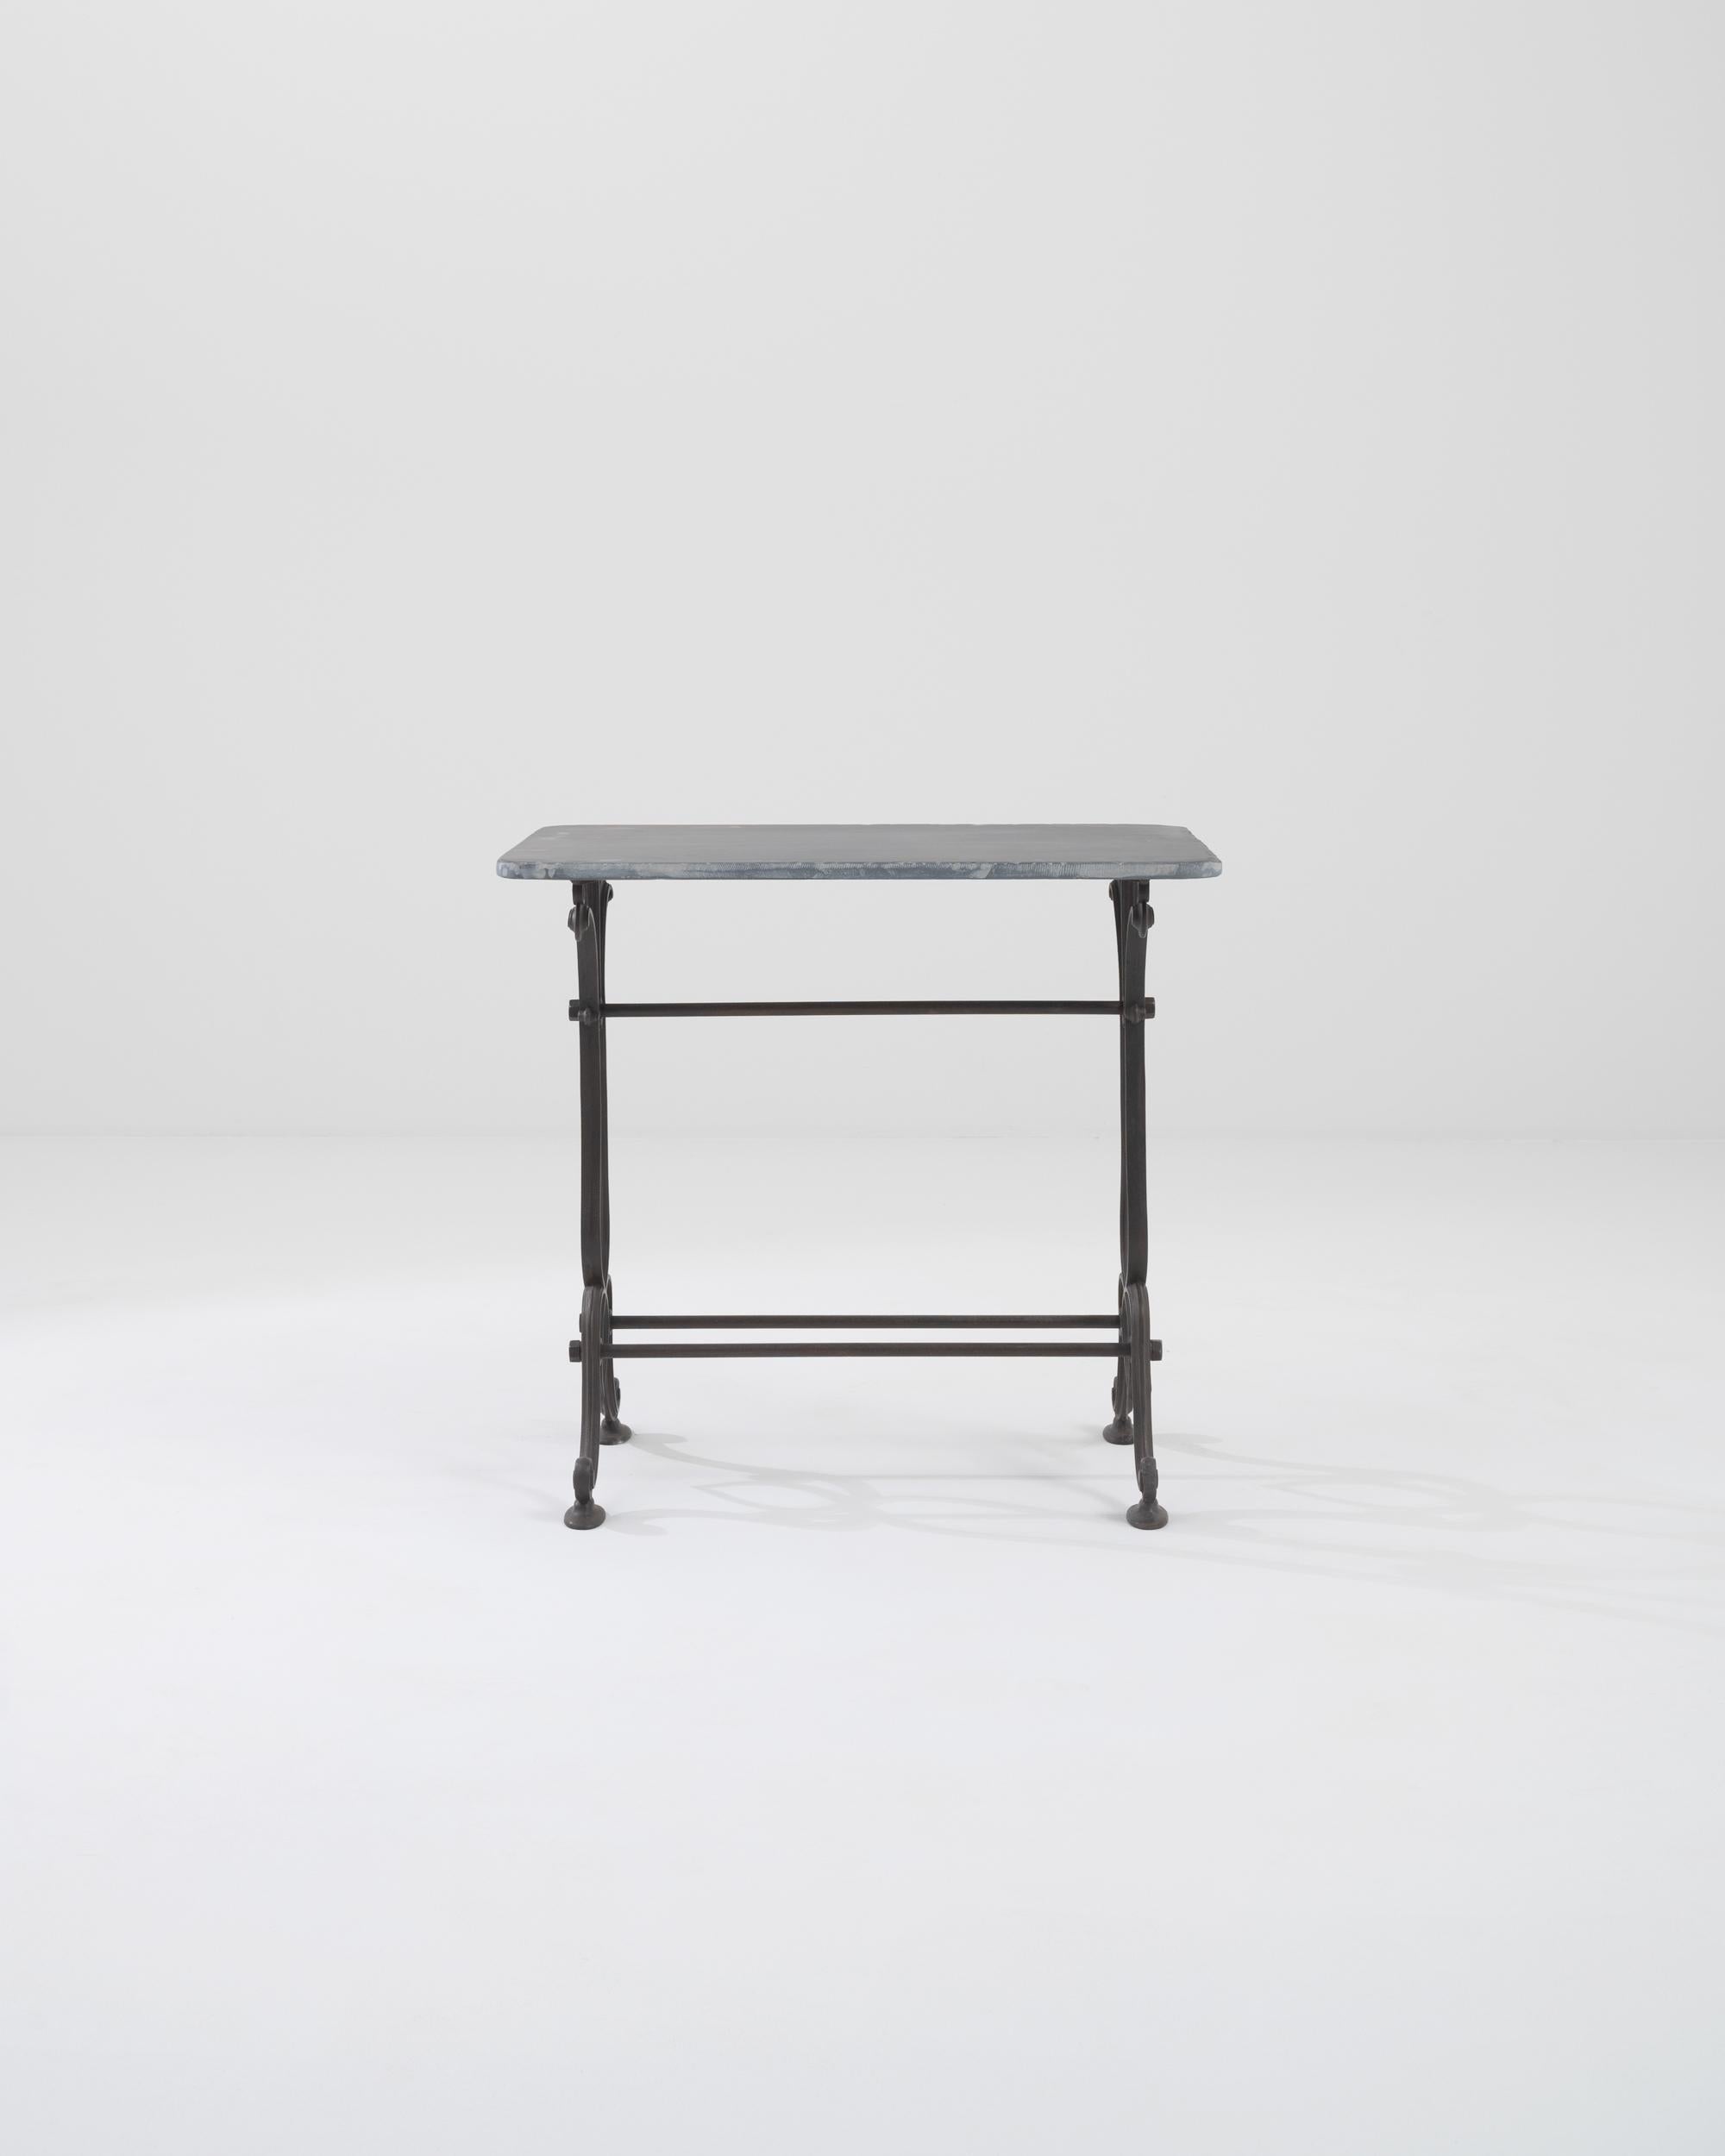 A metal bistro table with a marble top made in 1900s, France. Cast foliate motifs cap the ends of either side of this marvelous table, accentuating the dignity and confidence it embodies. The stark contrast of light marble and dark wrought iron